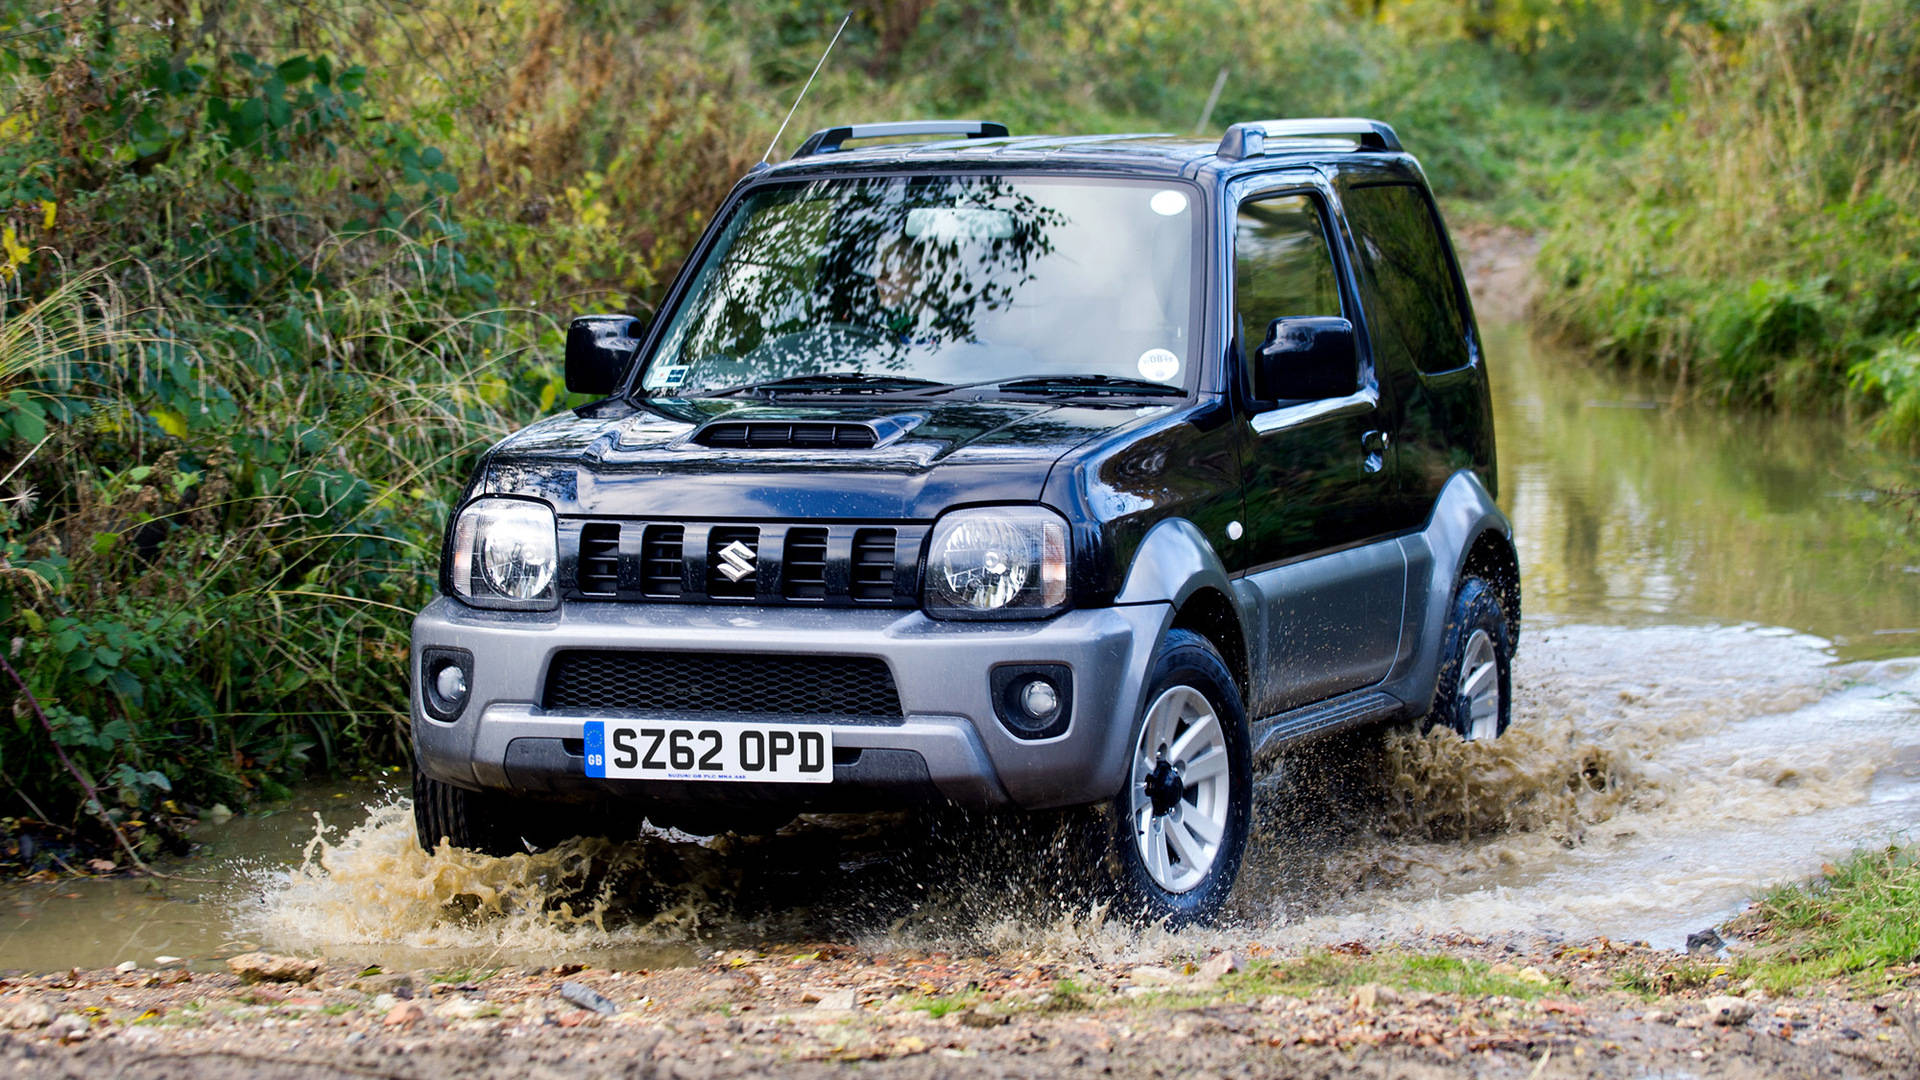 The endless road adventures with the 2012 Suzuki Jimny. Wallpaper